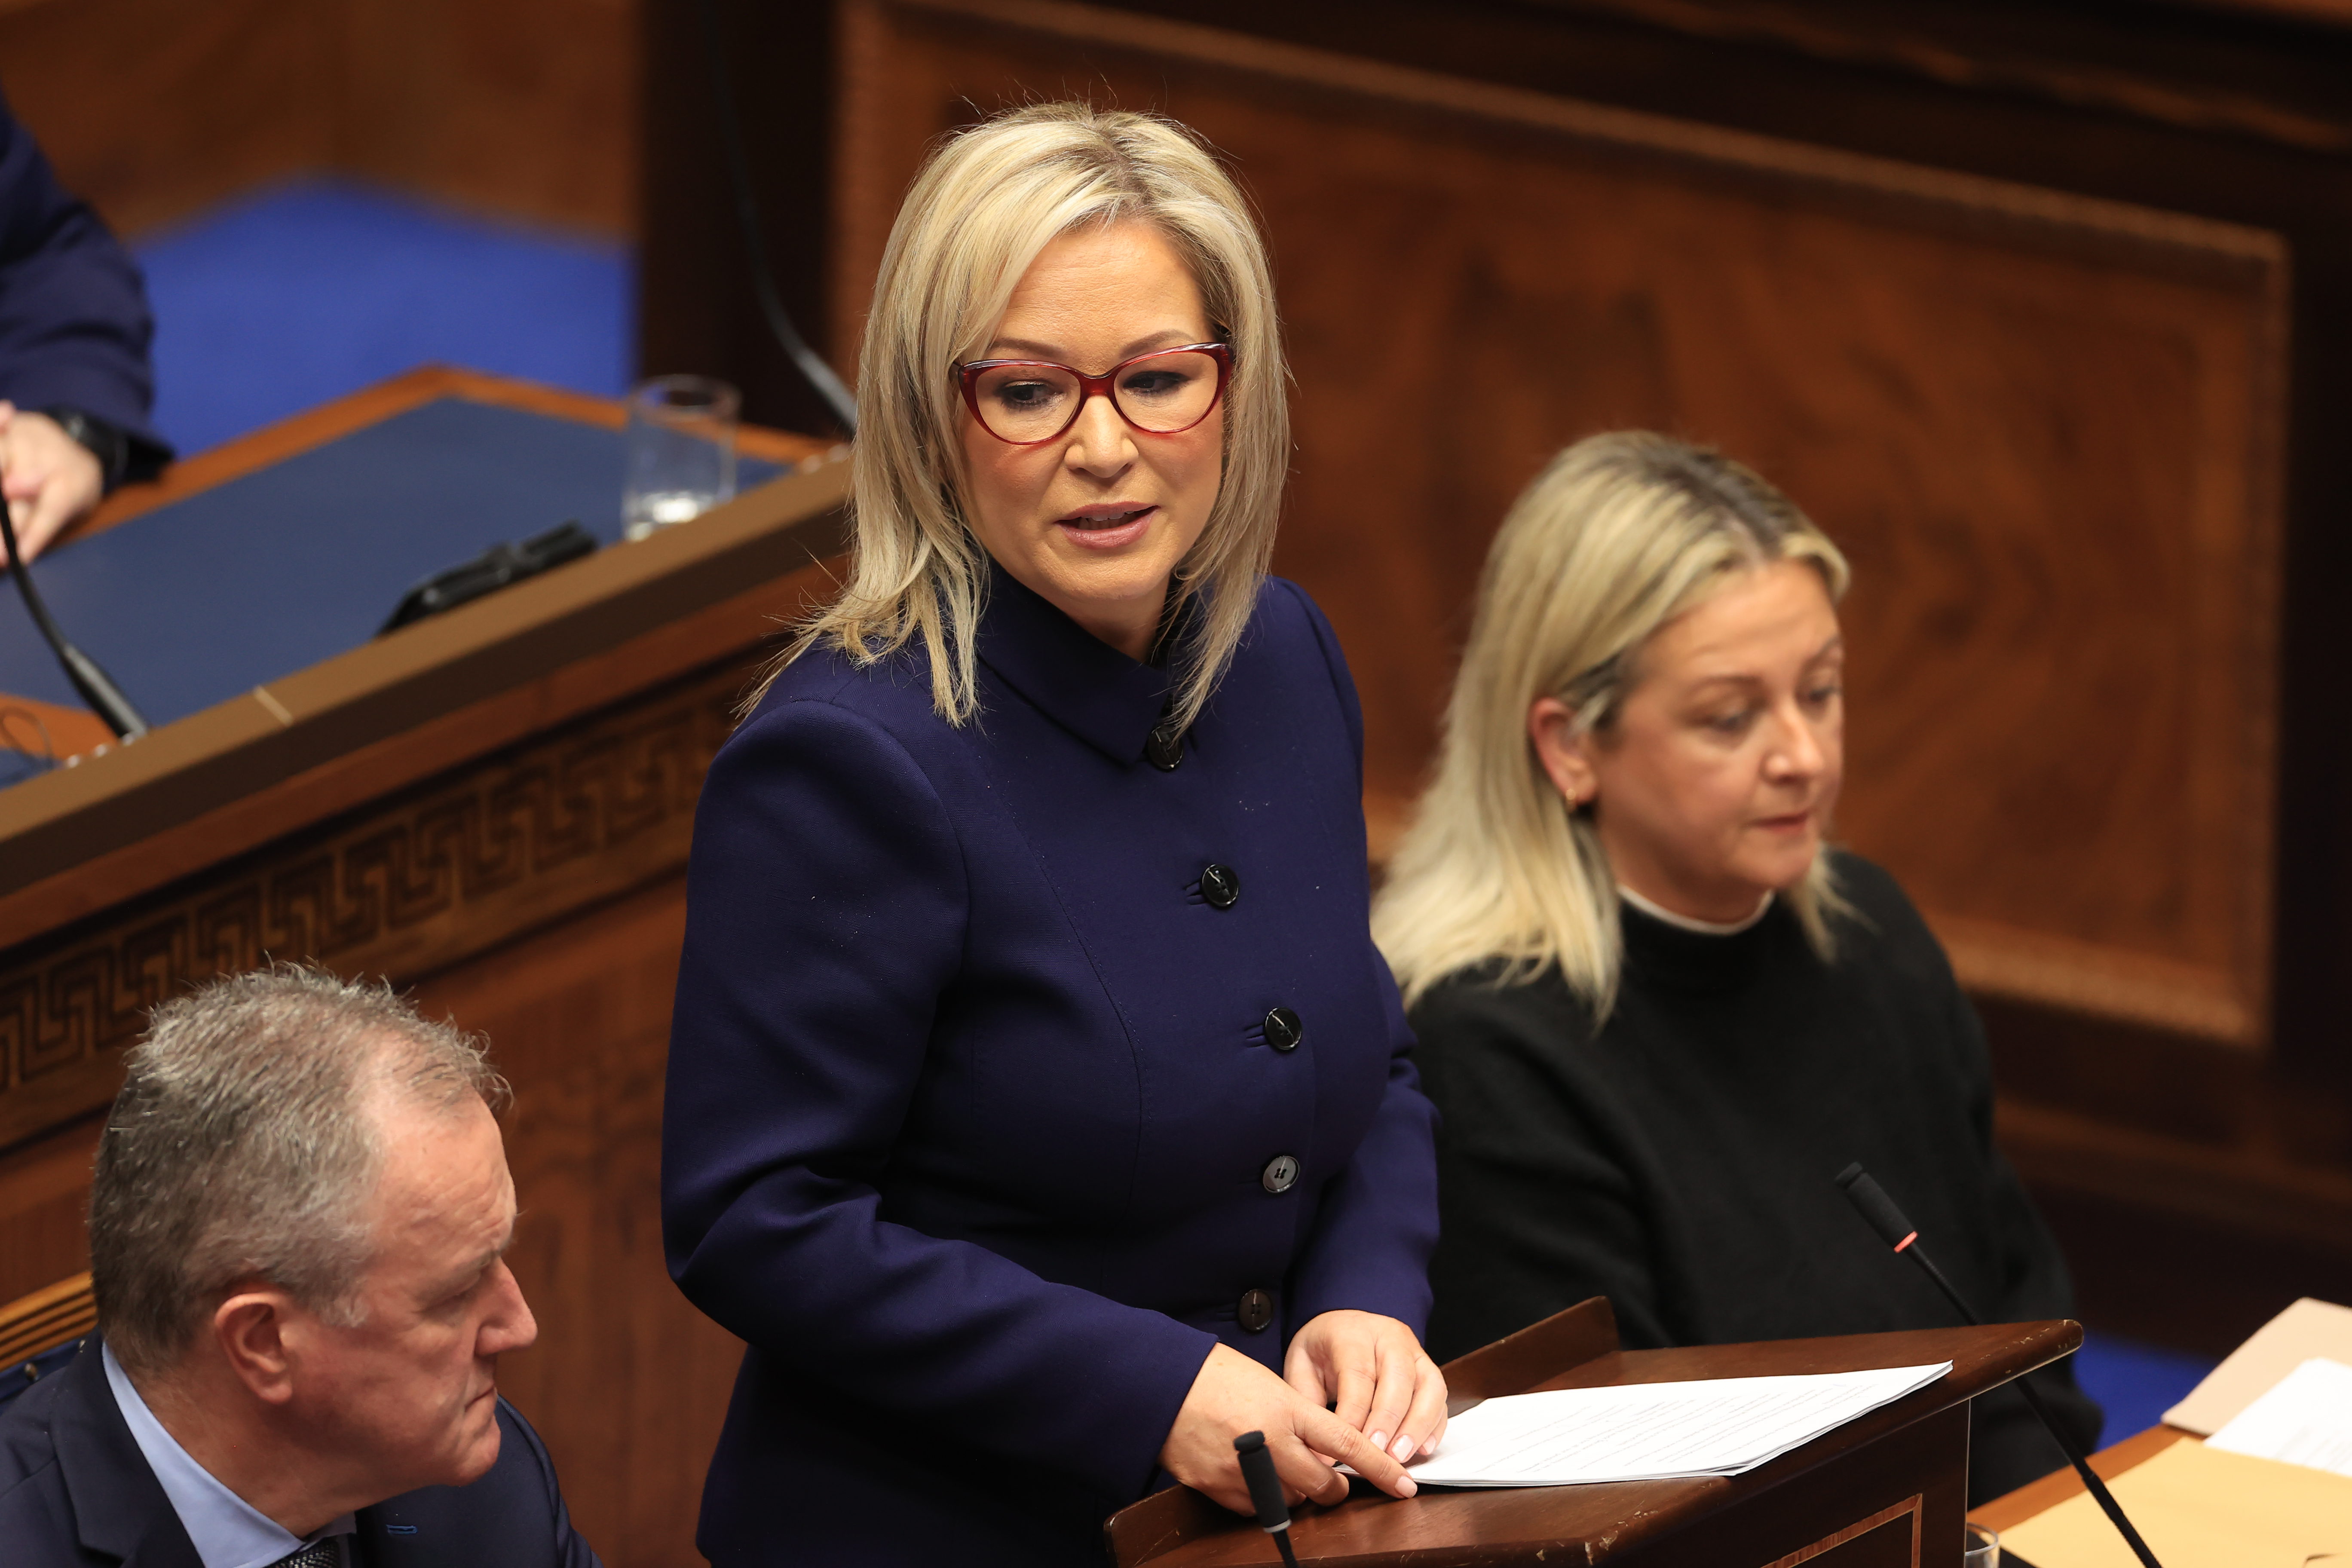 Michelle O'Neill has been sworn in as First Minister of Northern Ireland